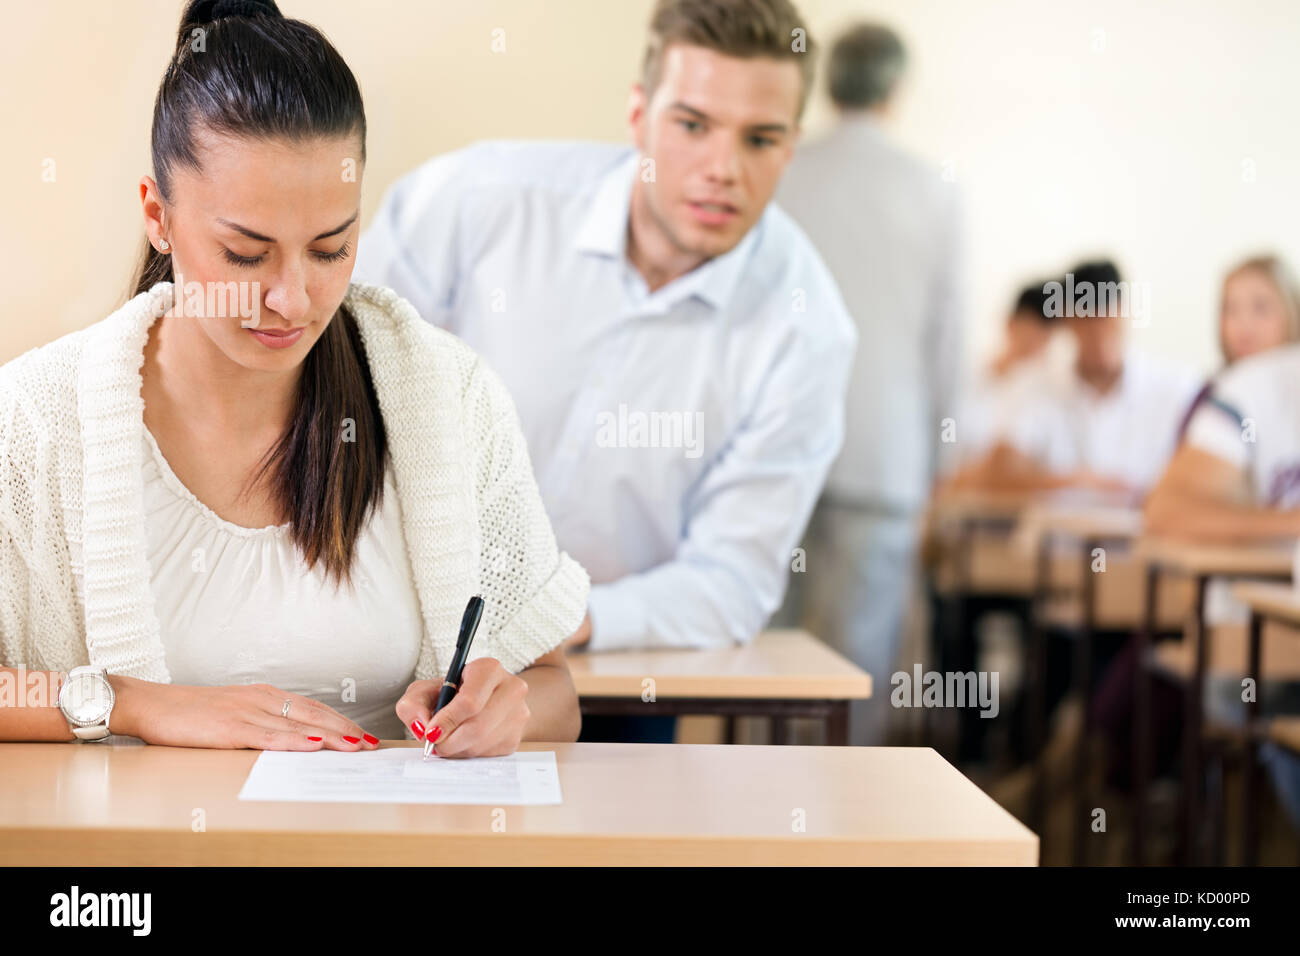 male student trying to cheat at test in class Stock Photo